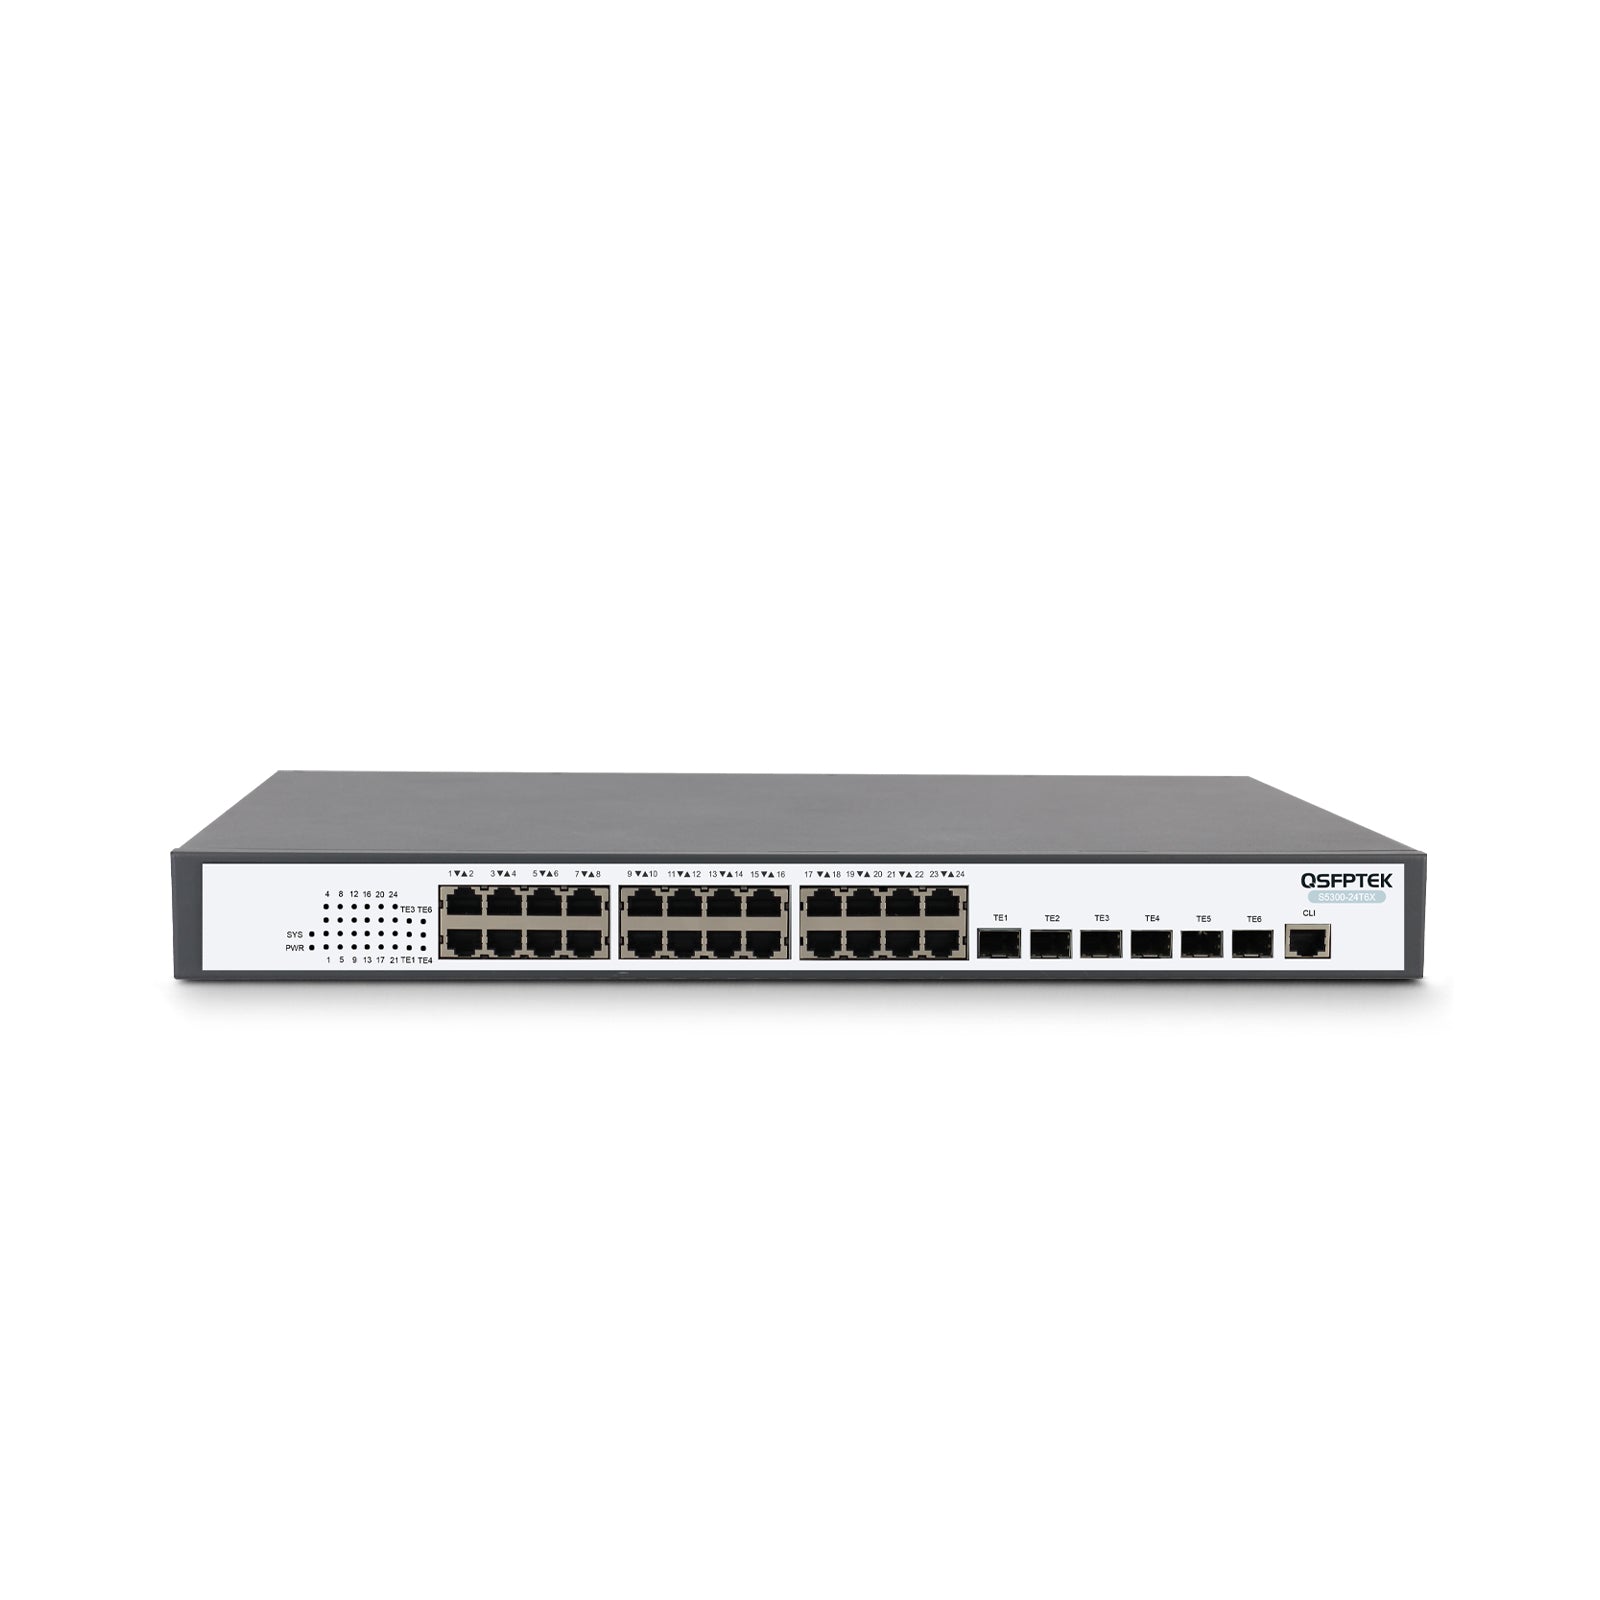 S5300-24T6X, 24-Port Ethernet L3 Switch, 24x GE RJ45 Ports with 6x 10GE SFP+ Uplinks, Stackable Switch